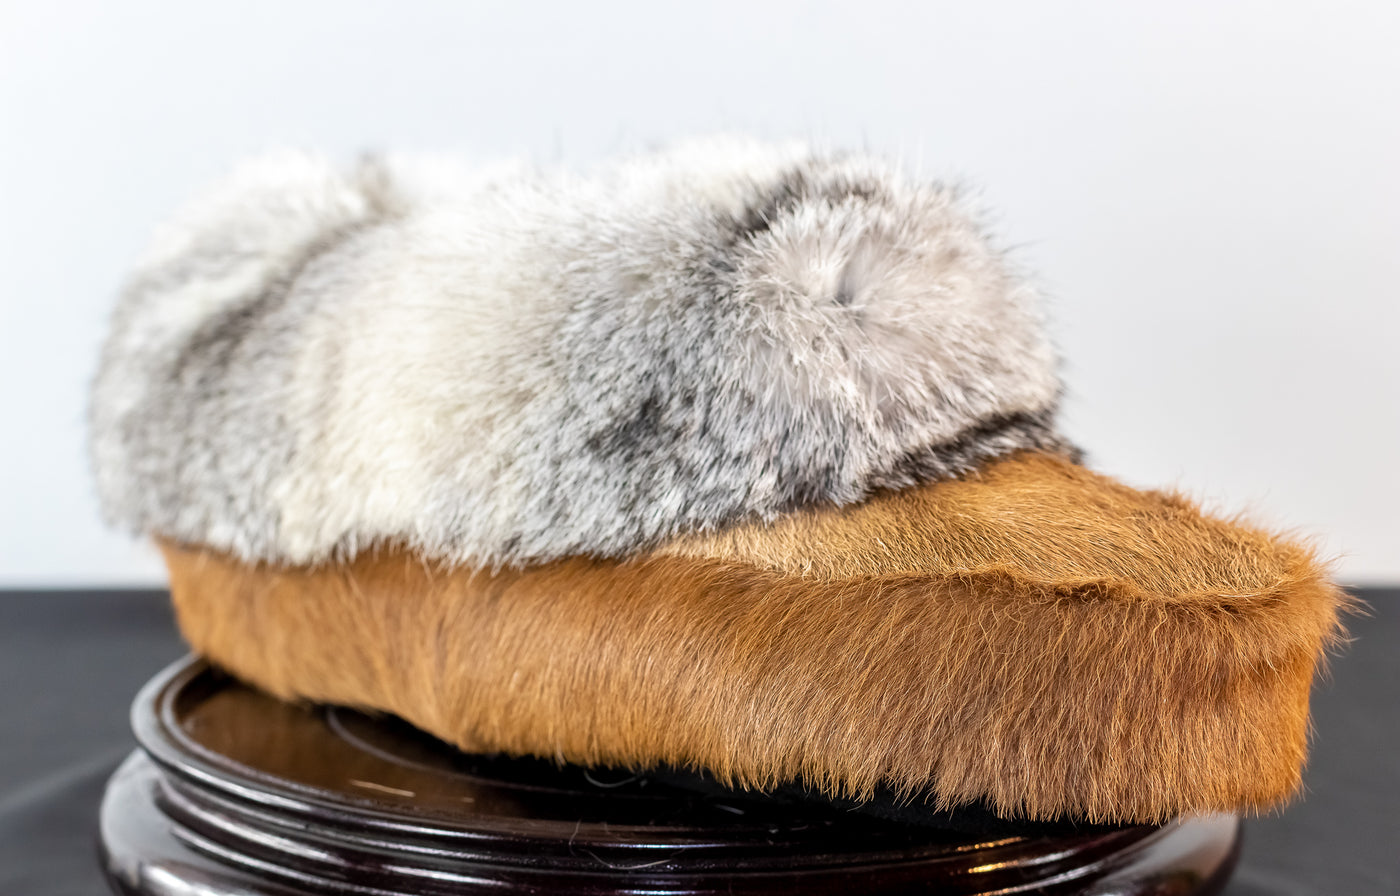 Slippers with mink fur